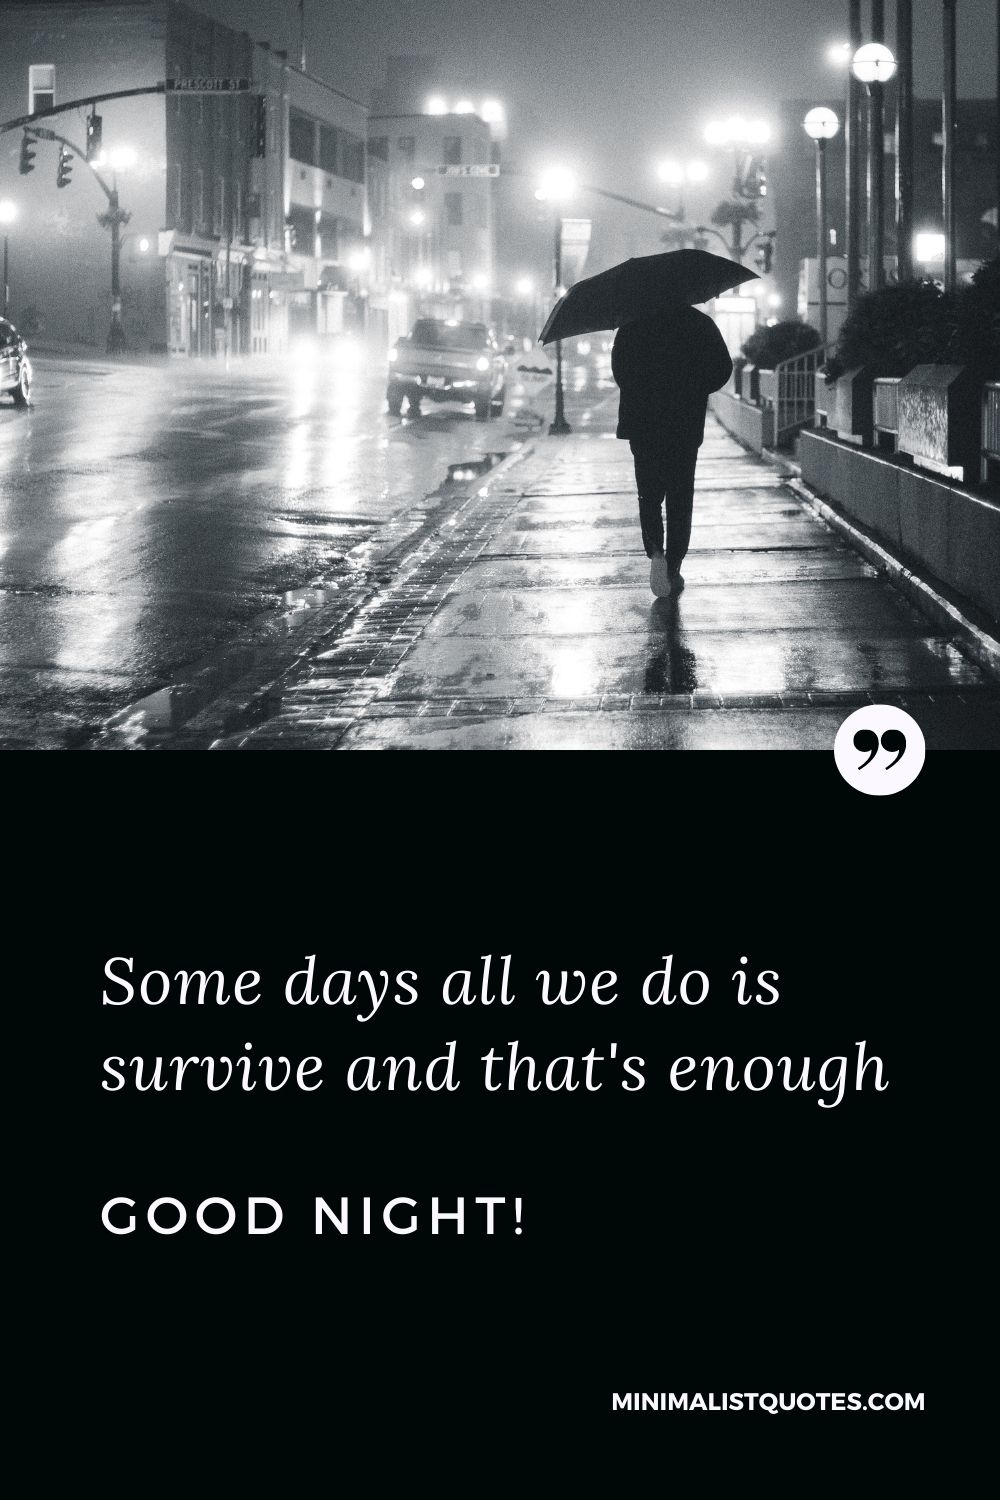 Good Night Quote, Wish & Message With Image: Some days all we do is survive and that's enough. Good Night!